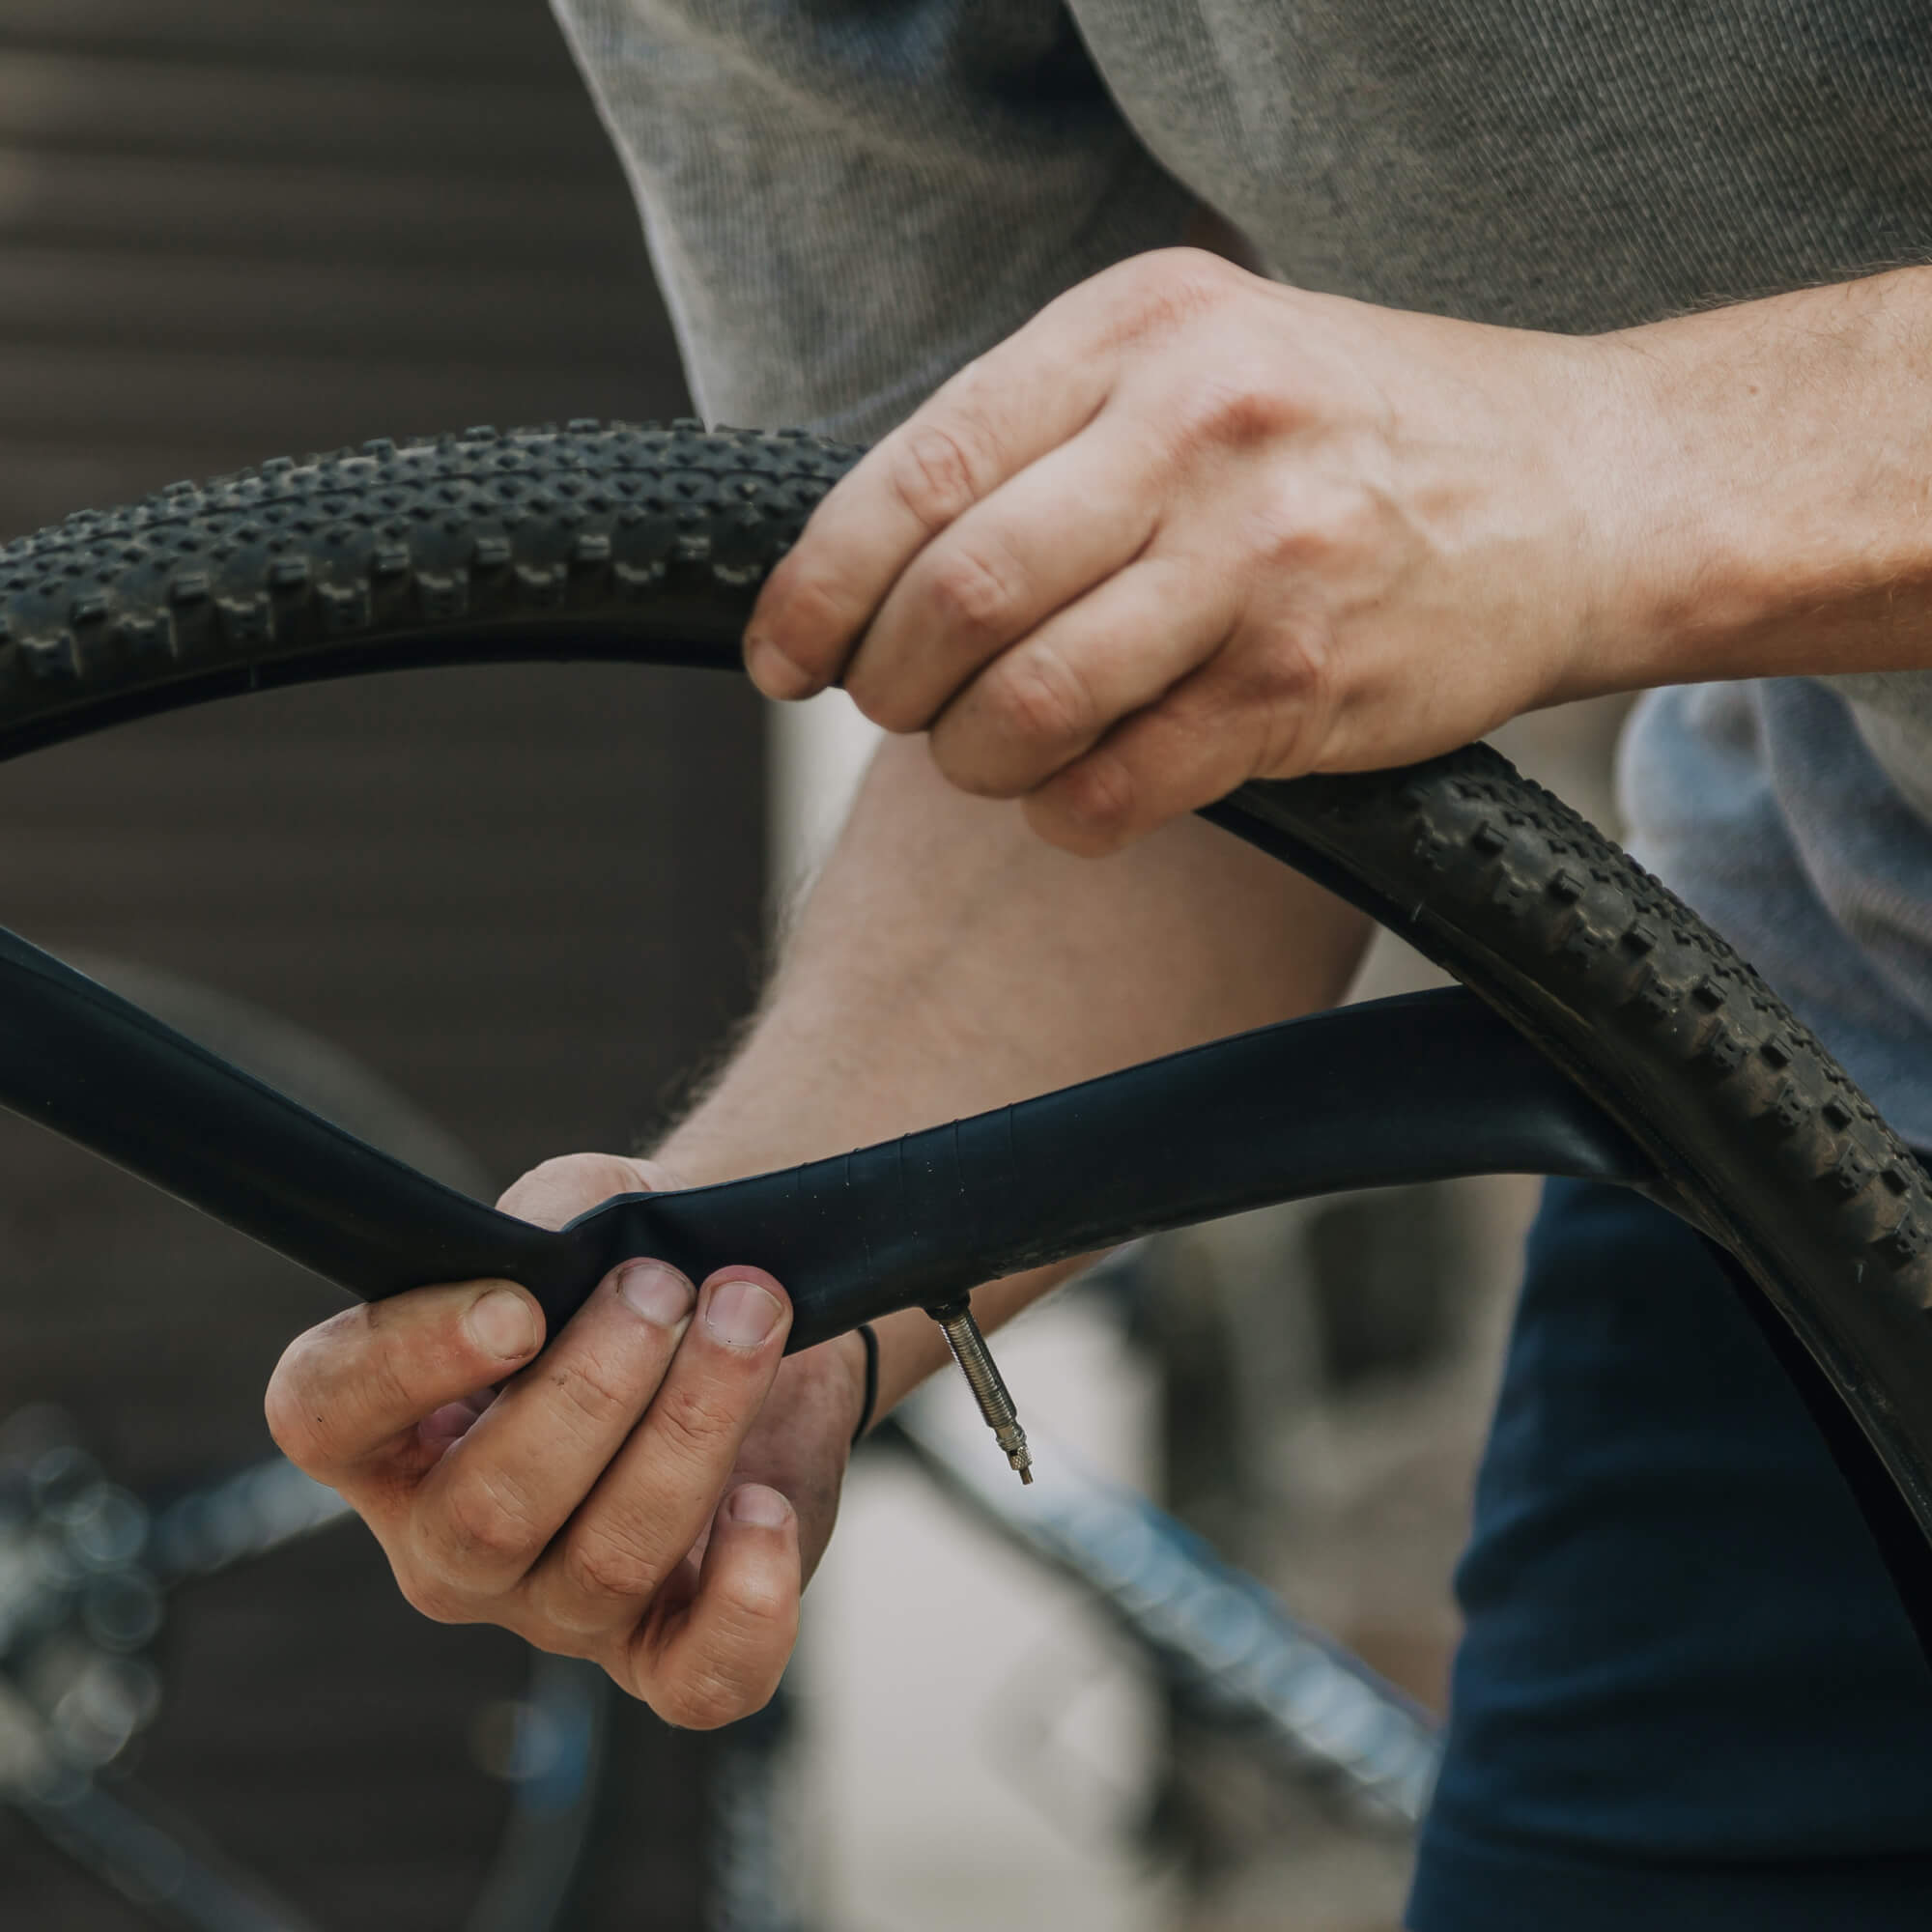 ​How to Pump and Change a Bike Tyre